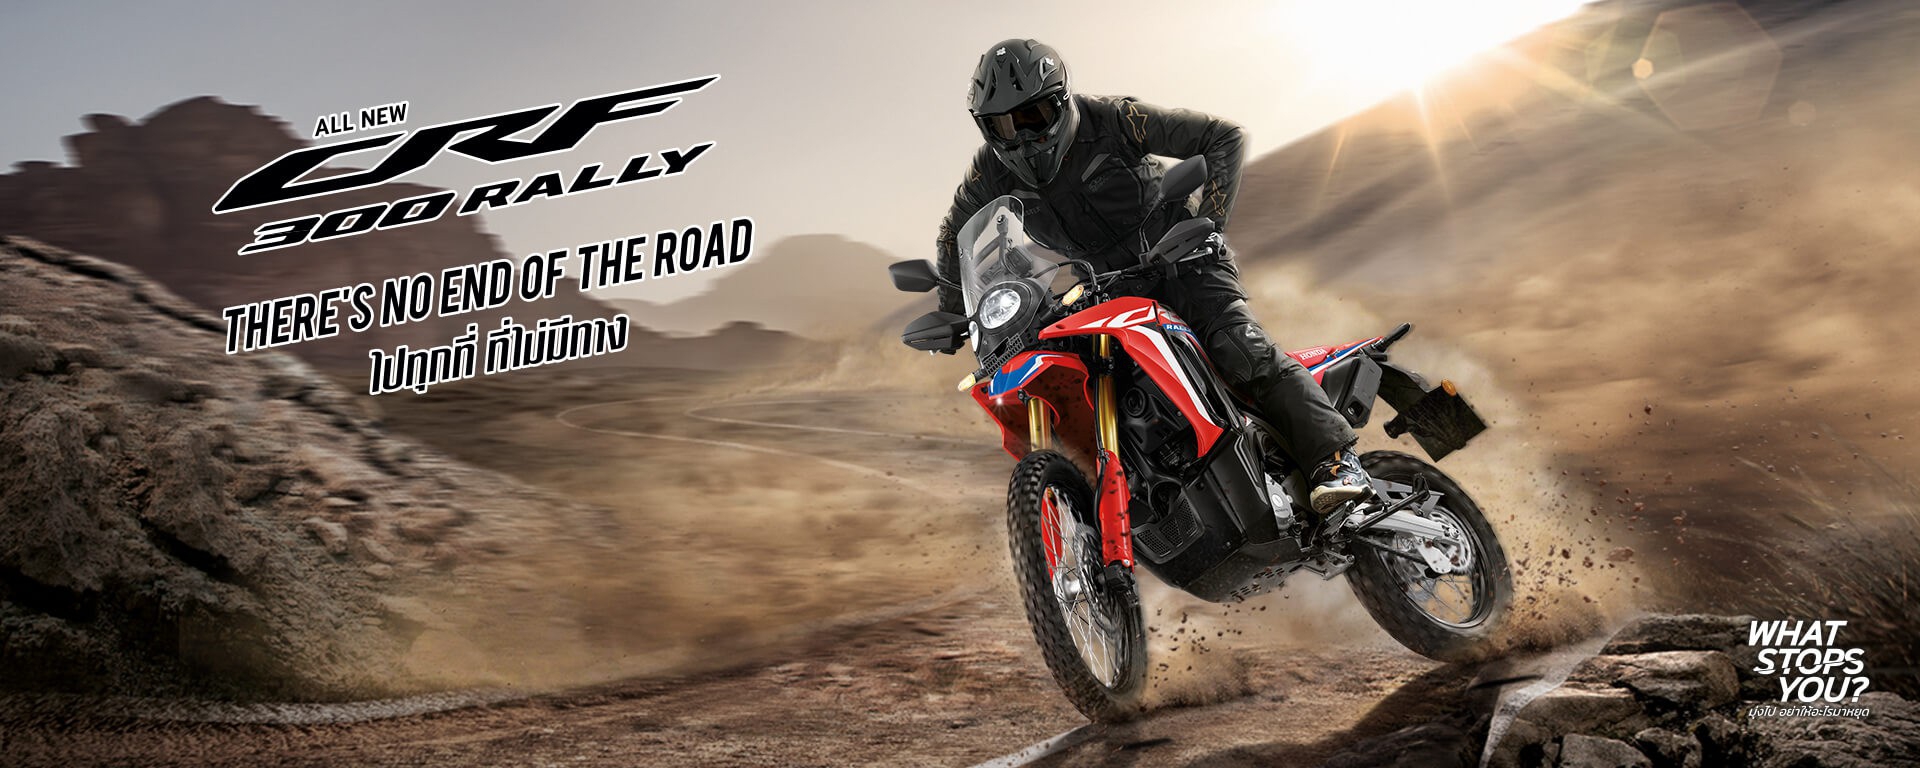 014-Desktop_productpage-banner_All-new-CRF300RALLY.jpg (613 KB)